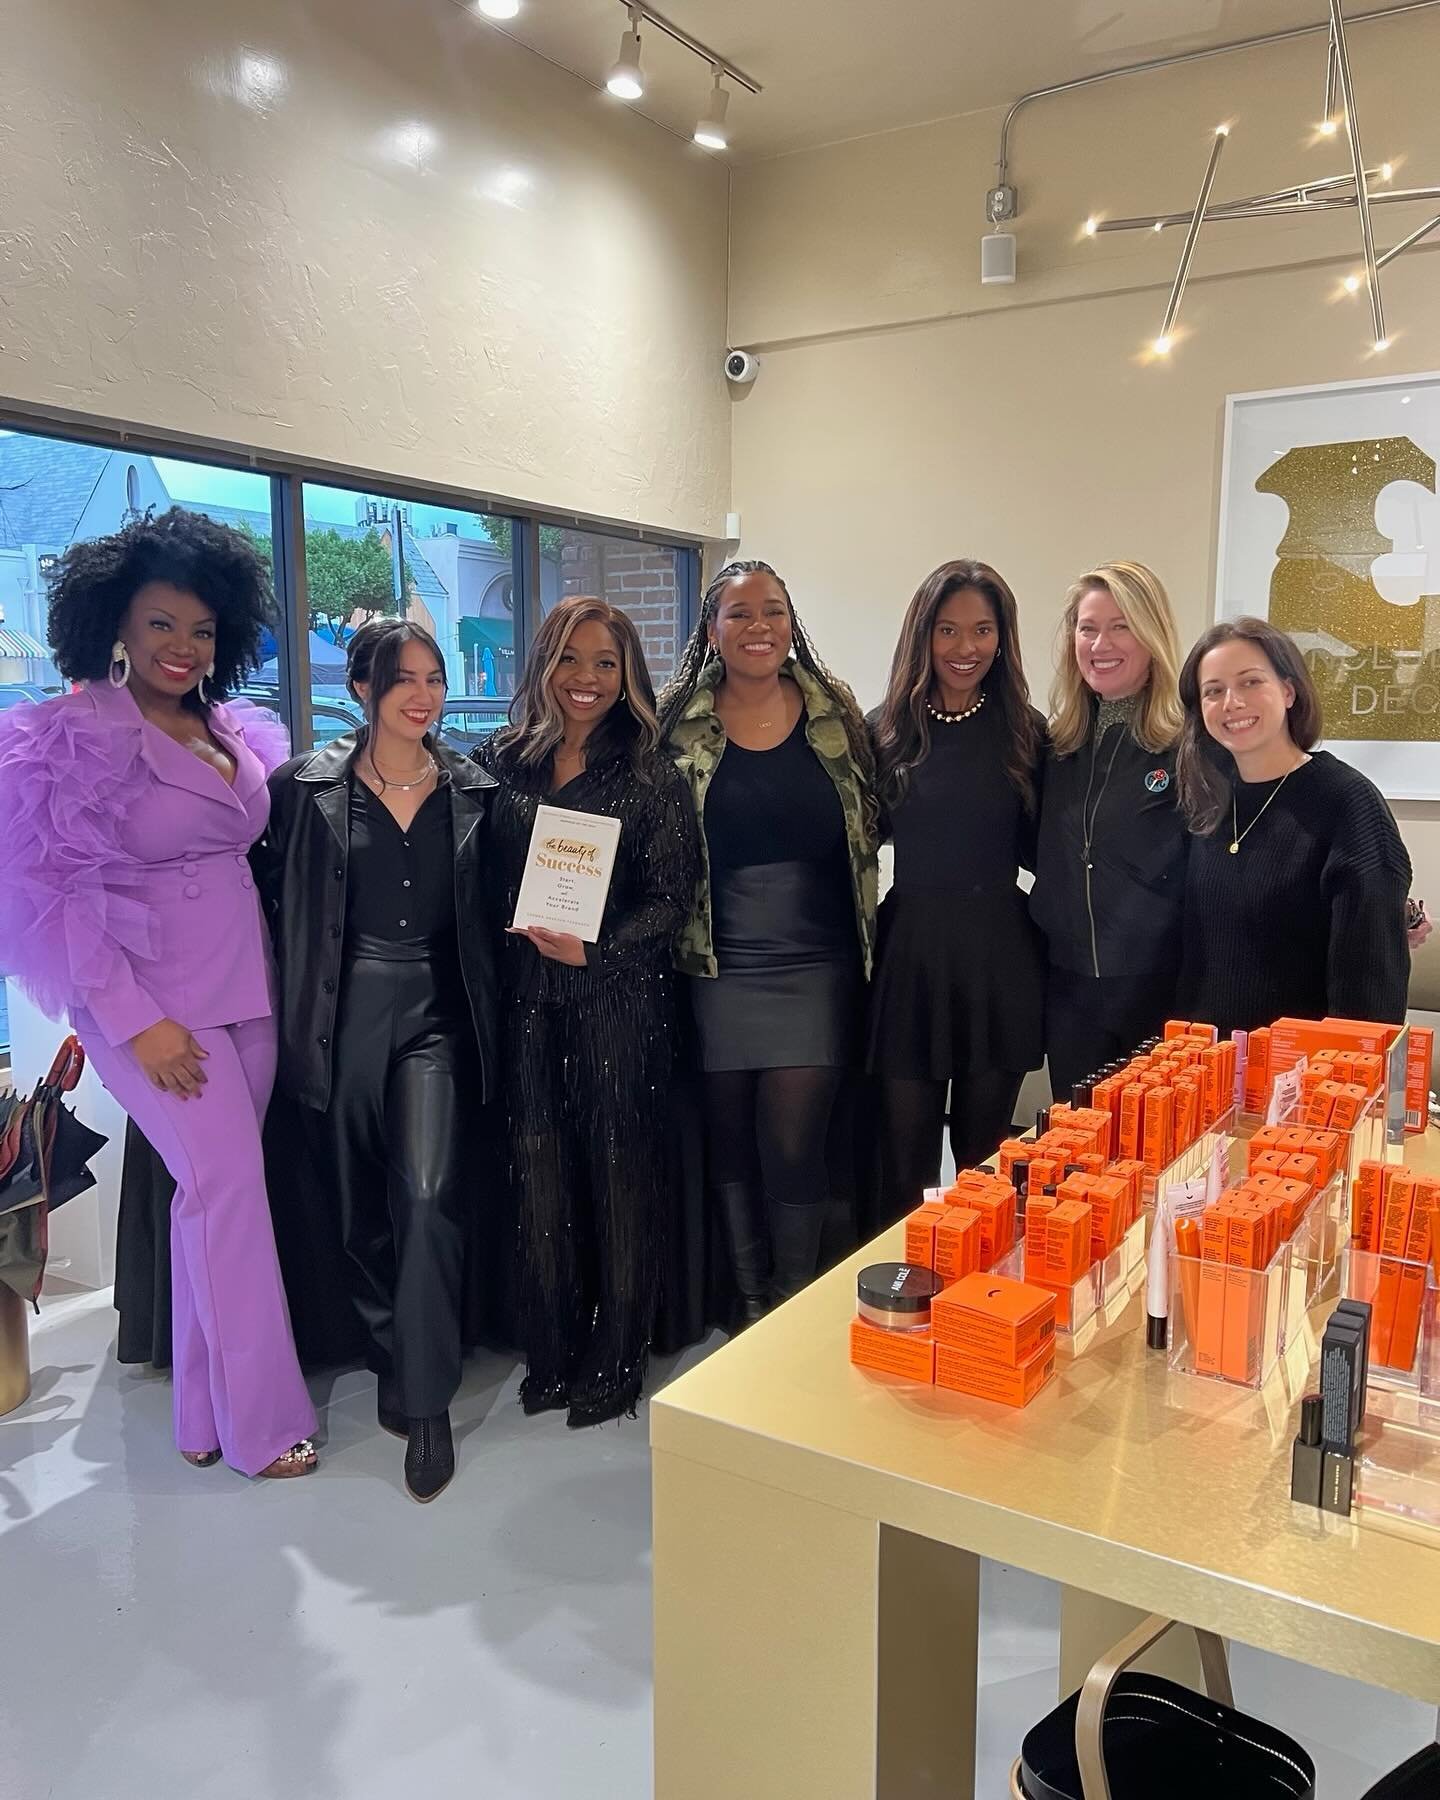 As I prepare to go into the next two weeks of &ldquo;The Beauty of Success Books + Bubbles&rdquo; book tour I&rsquo;m so grateful for the amazing @BTfounderStudio community who showed up and supported me, hosted events and bought books! My mission to